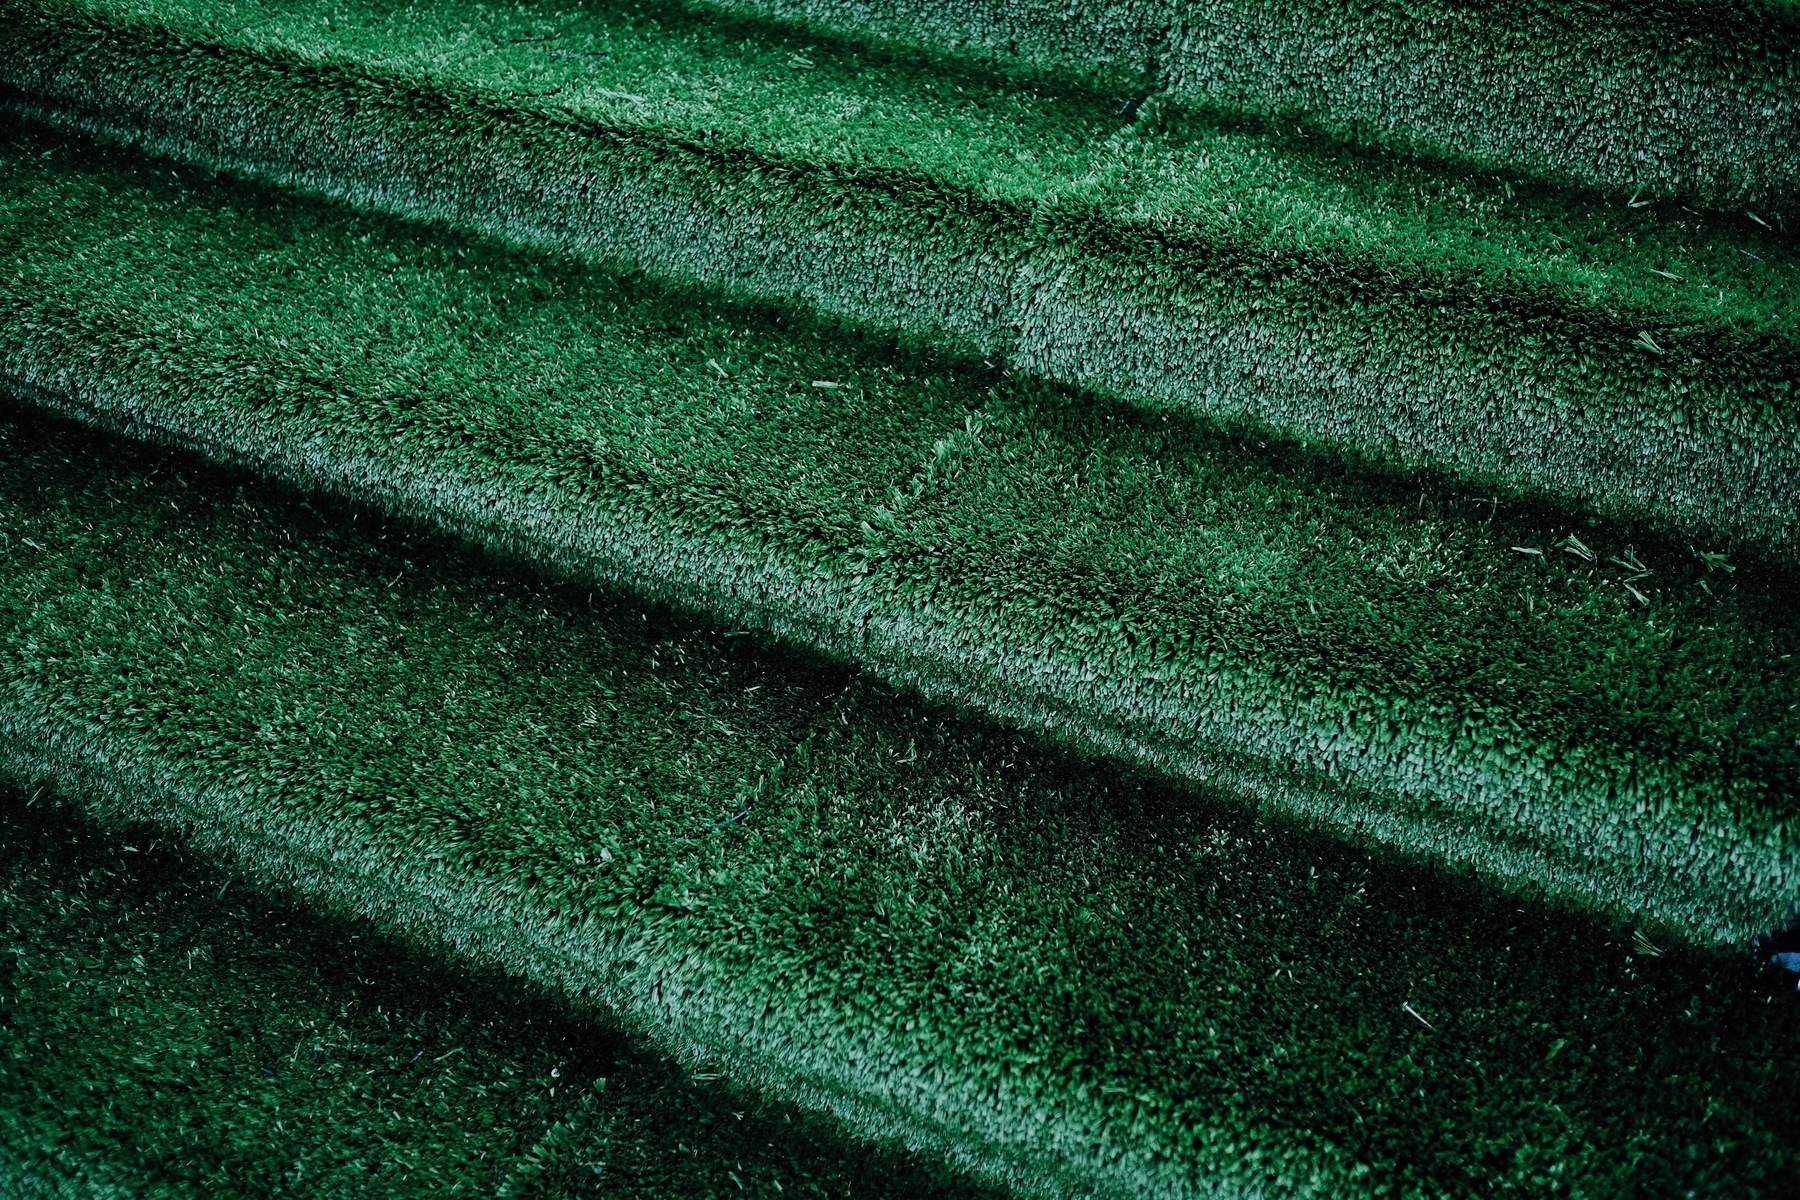 Stairway covered in fake grass.